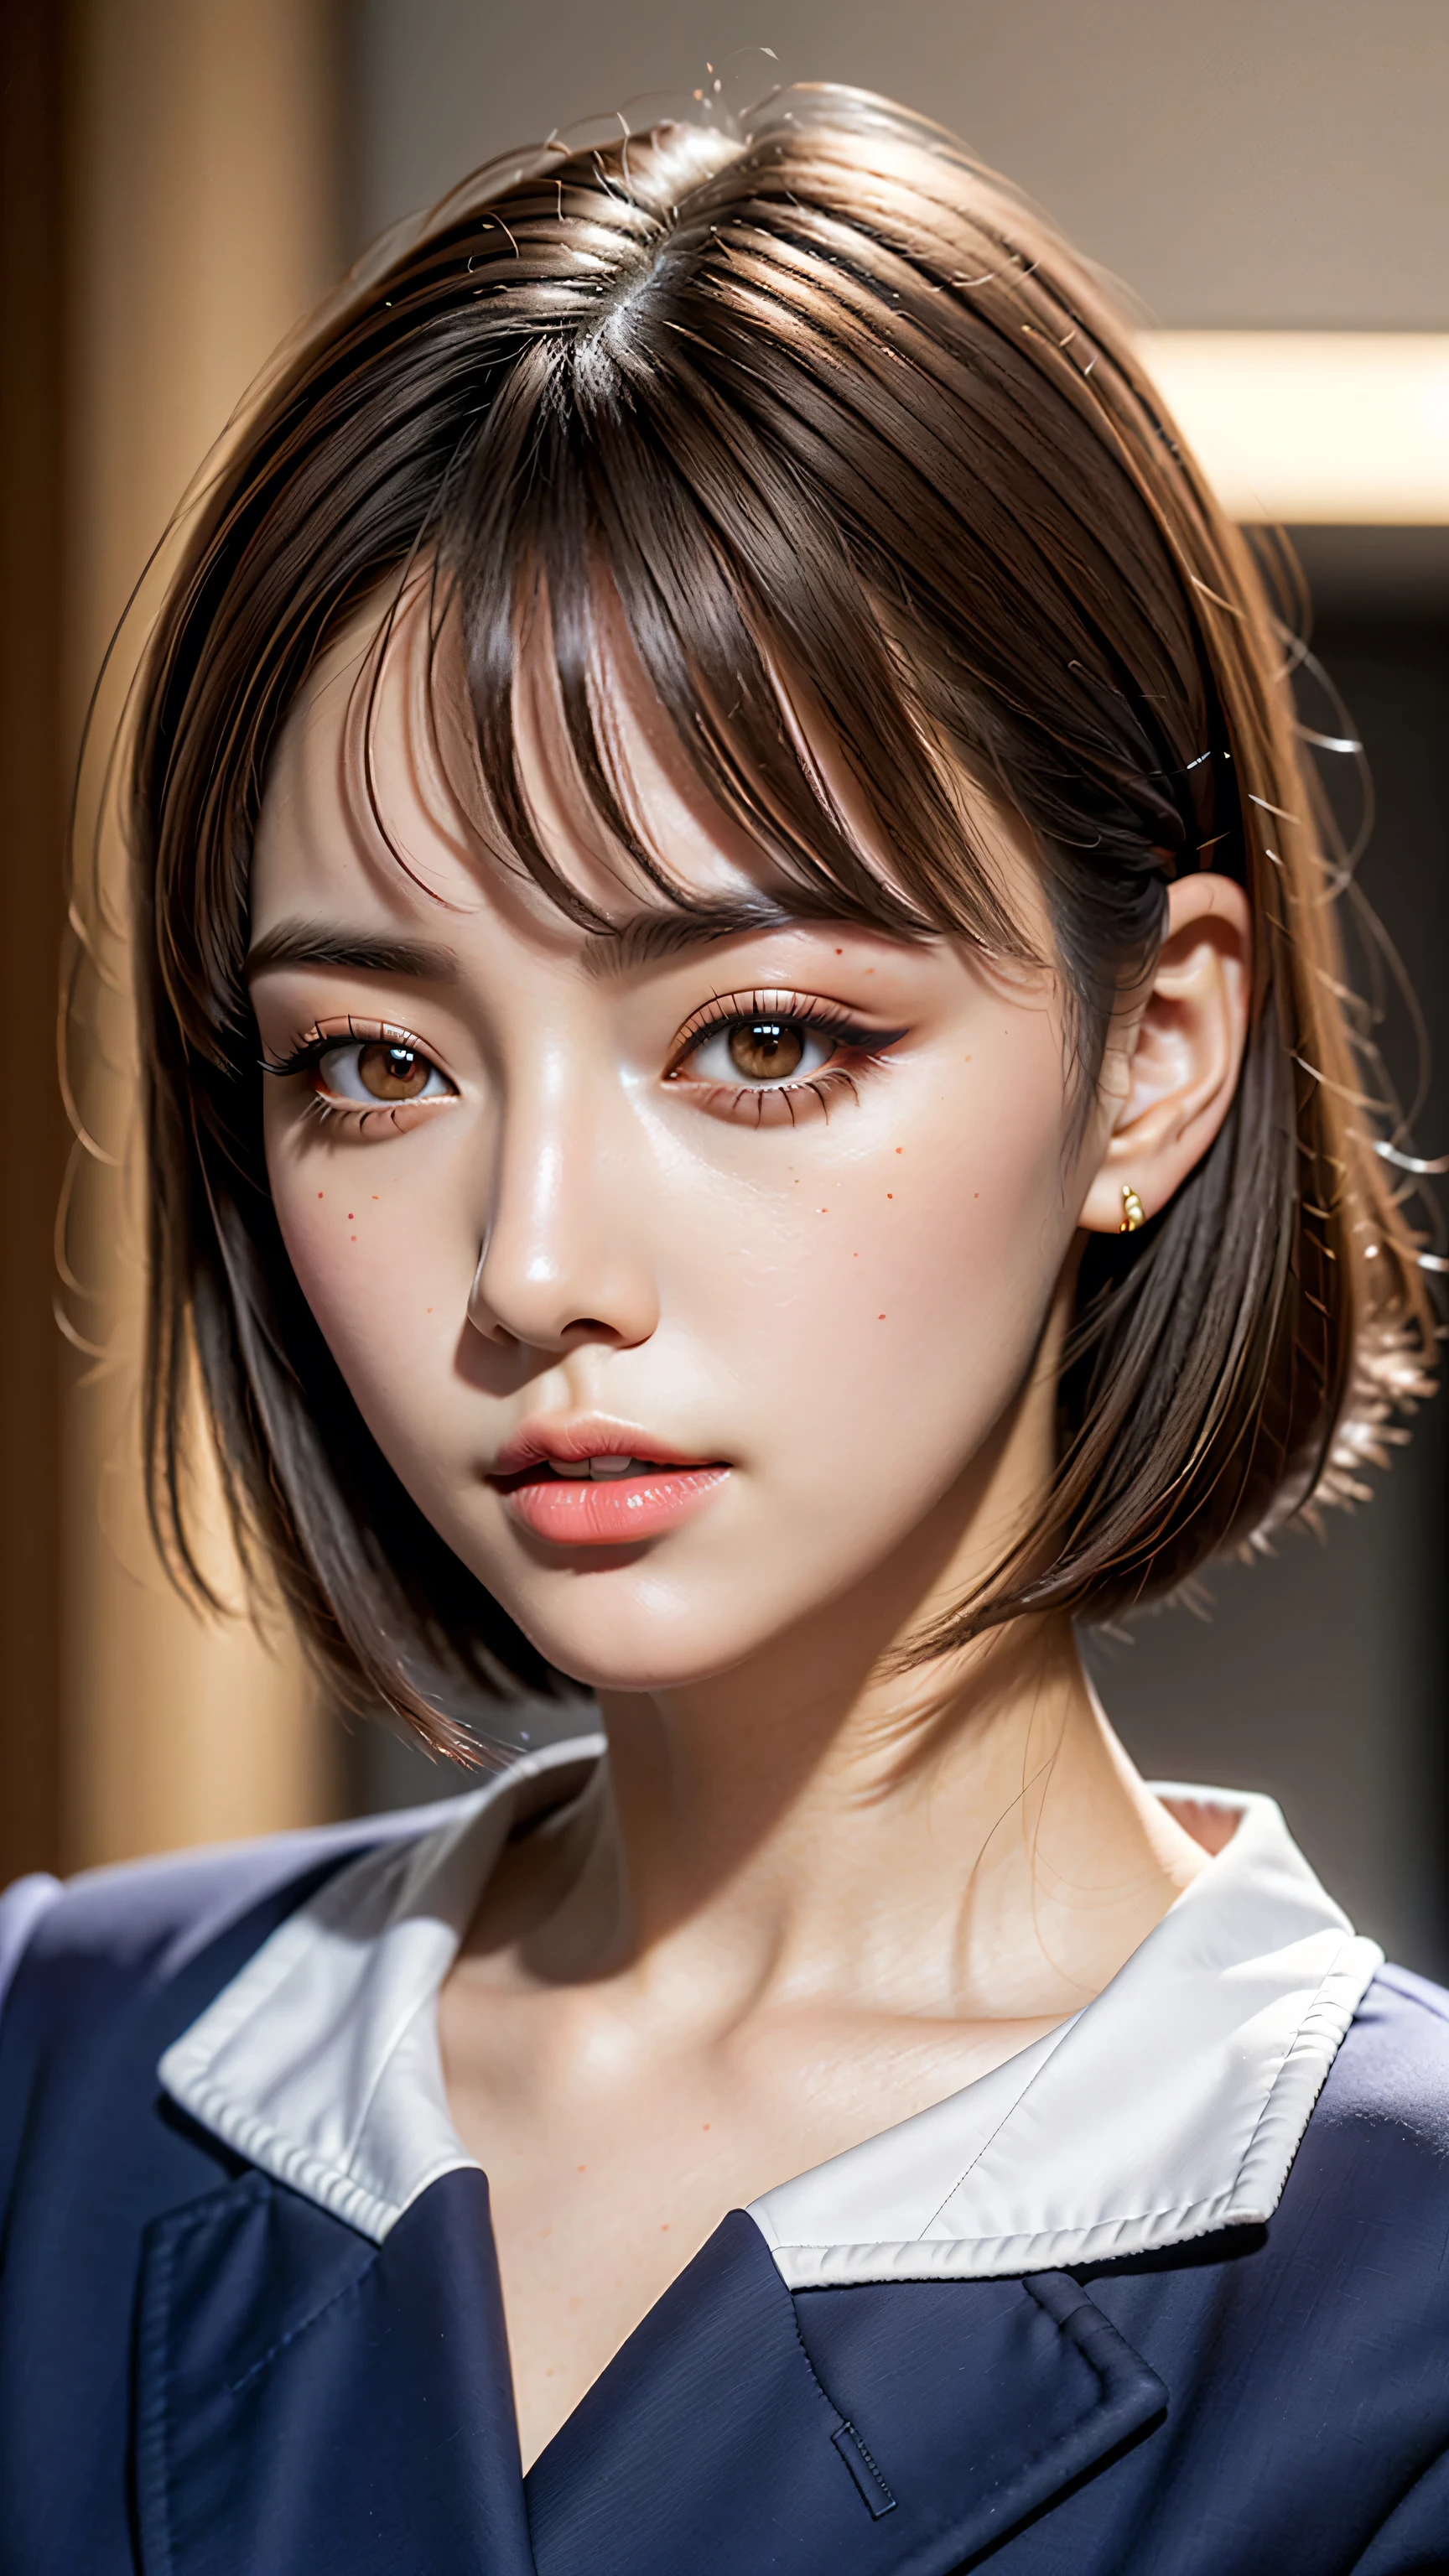 Generated in SFW, (1 Female:1.37), ((extremely Detailed sharp-portrait:1.2)), (close up of her face), Looking at the viewer, Plump Cheeks, Supermodel, 17 years old, high school girl, (Ultra realistic), ((photorealistic)), ((Sharp Focus)), (highest resolution), (the most absurd quality), (masterpiece), (Illustration), 32K, (Best Illustration), (Improvement of quality:1.4), (high detailed realistic Super beautiful face), (Highest quality realistic skin texture:1.4), (Perfect Anatomy:1.37), very small head, Very small face, The background is a black wall:1.15, (school uniform, :1.05), (Navy blue long sleeve blazer:1.37), (White collared blouse shirt:1.3), (Line pattern tie:1.21), (Navy Check Skirt:1.1), Slim figure, Tight waist, (best highest detailed realistic brown_eyes:1.4), ((super realistic sharp-eyes)), (tired and sleepy and satisfied:0.0), ((close up of a woman's eyes:1.2)), perfect round eyes, finely detailed pupils, Thin lashes, Sharpen your eyebrows, Natural Makeup, [Pink lipstick], (Beautiful Lips:1.33), (Great nose:1.2), (Flat Chest), (Slim lower body), Shiny brown hair, Let your bangs hang long, (Short Hair:1.21), Movie Lighting, 